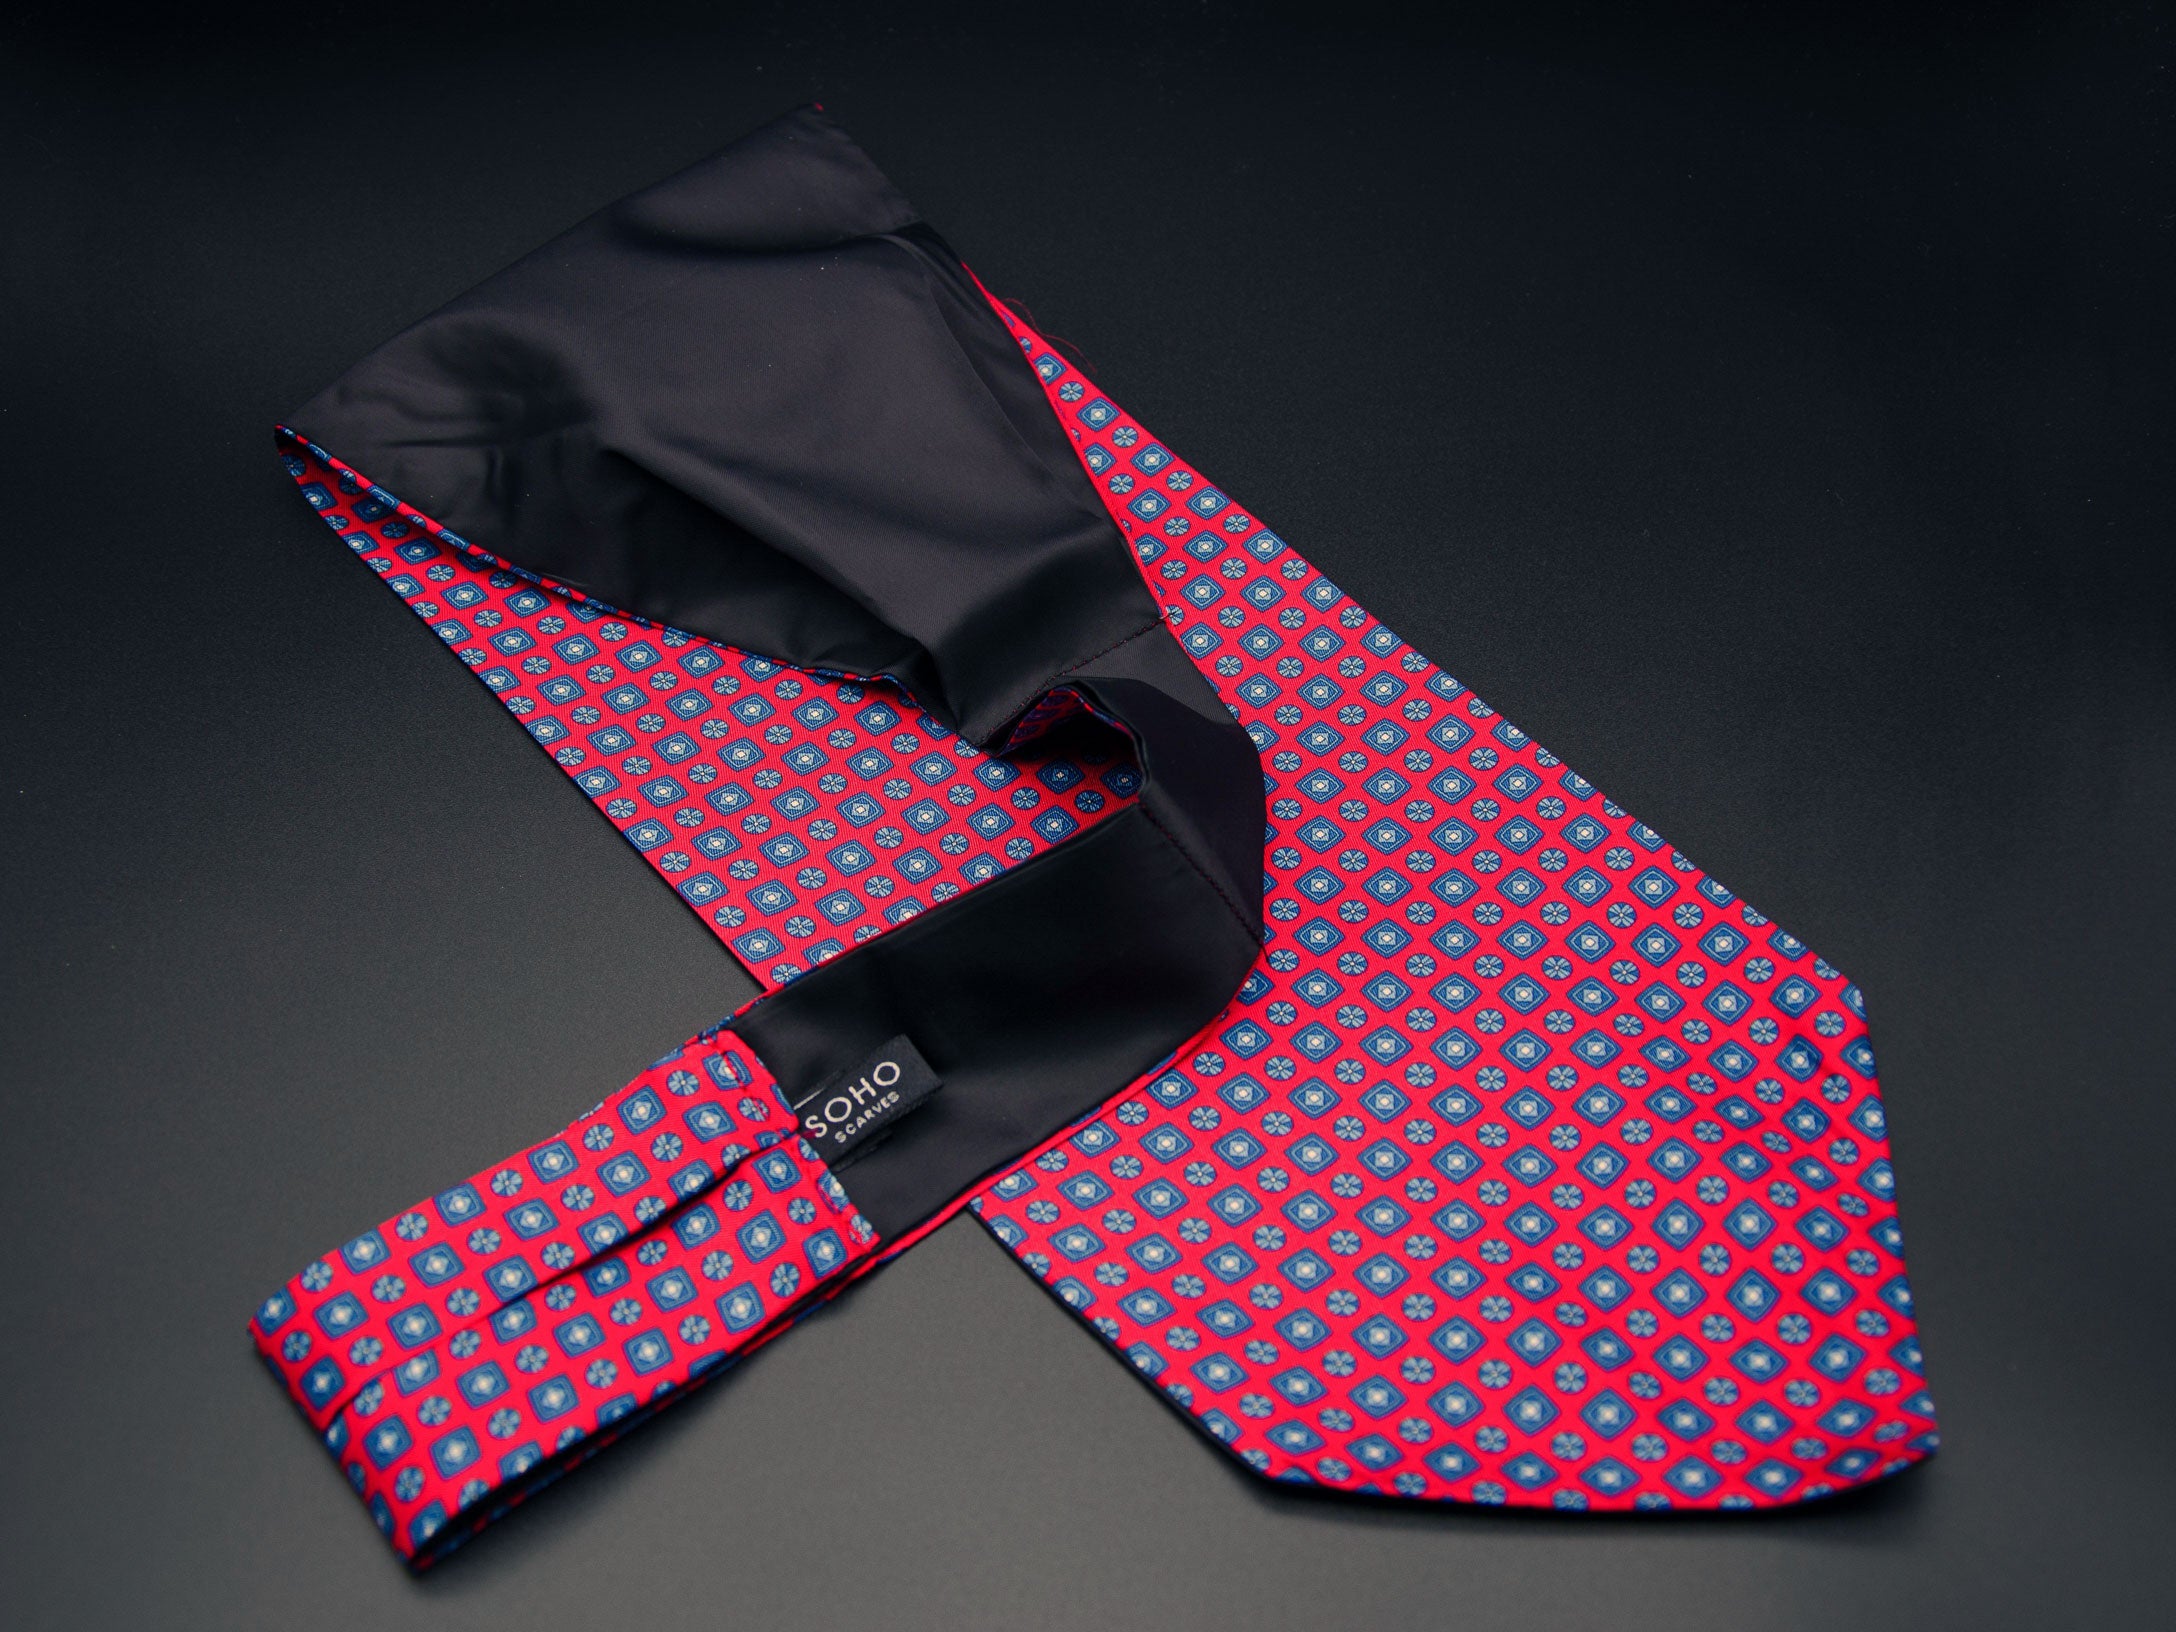 Bright red 'Canaria' single pointed Ascot tie arranged diagonally with wide point in foreground with clear view of blue motifs made up of tiny squares, disks and diamonds. Narrow end of tie folded back and over to reveal dark lining and 'SOHO Scarves' branding label.